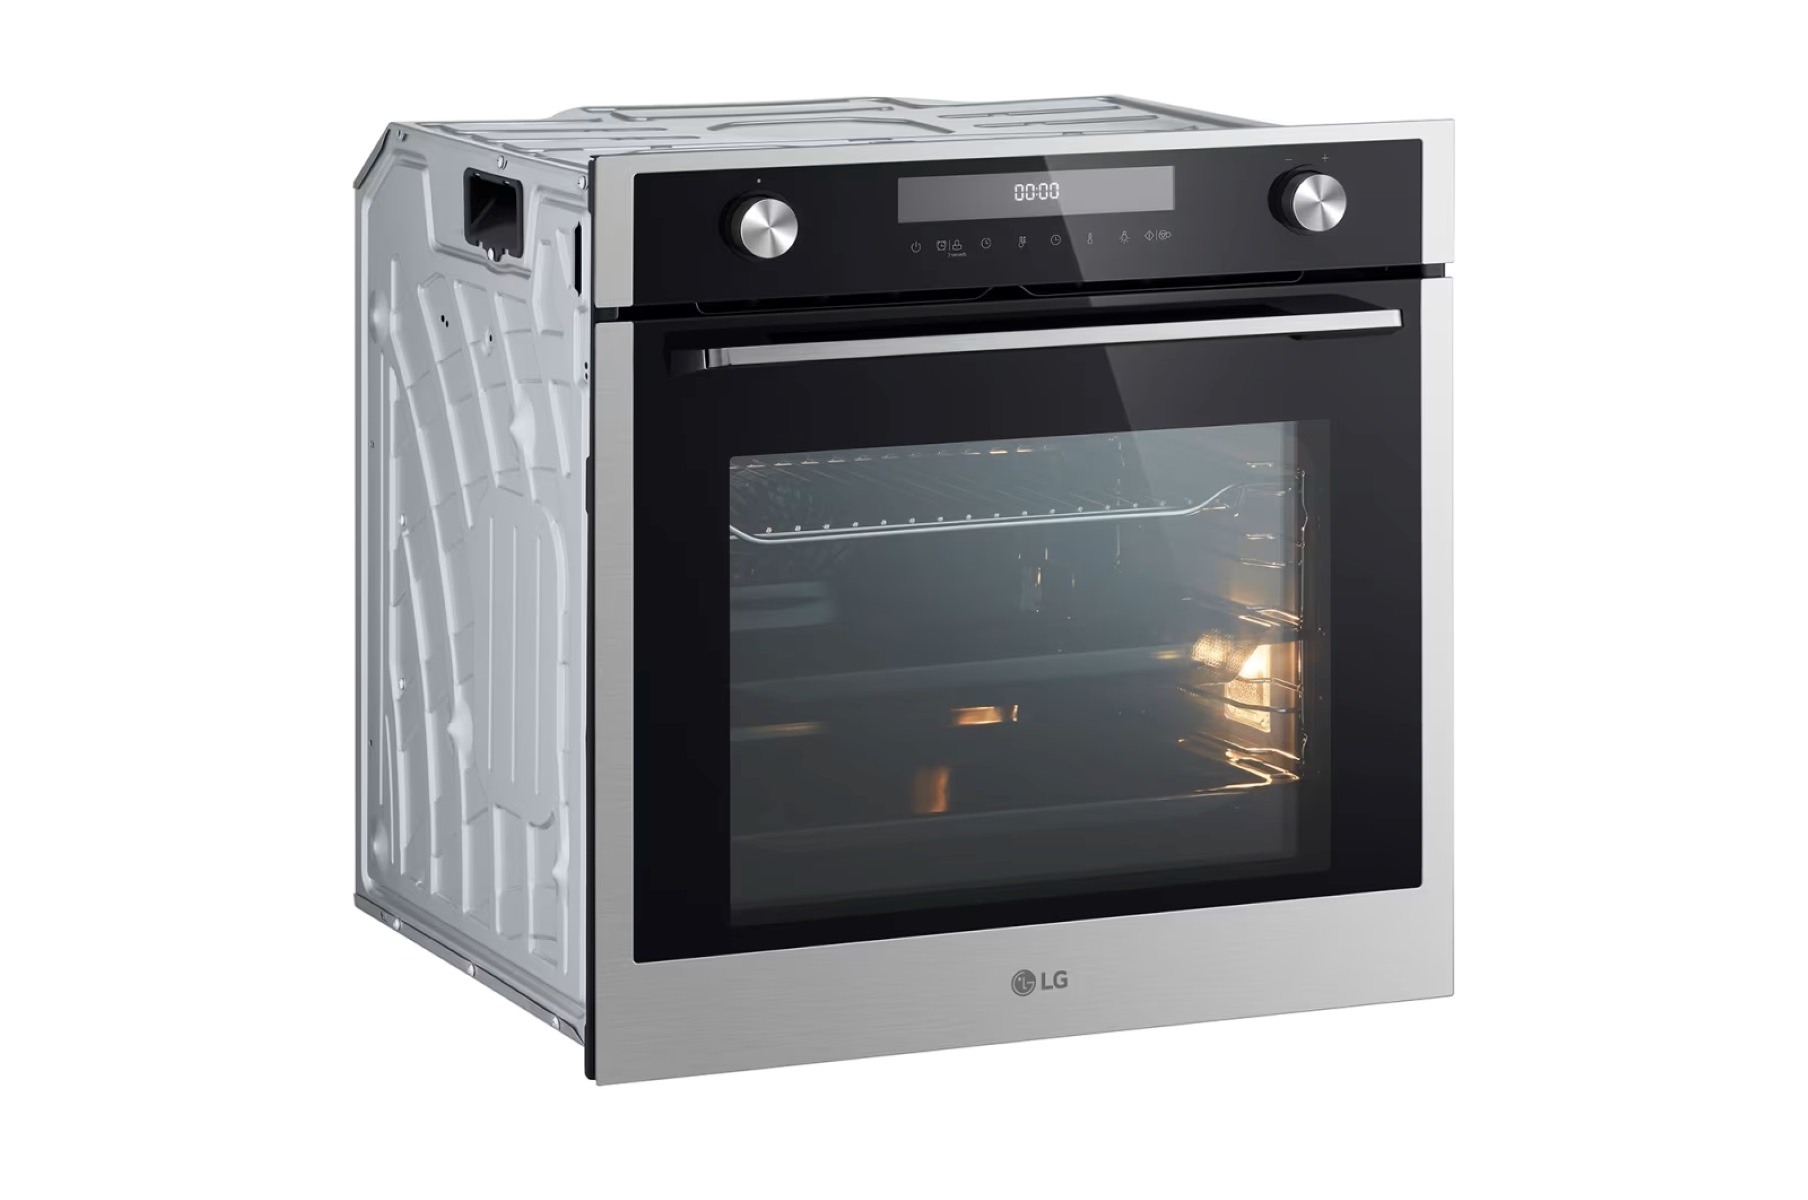 How To Fix The Error Code F-19 For LG Oven